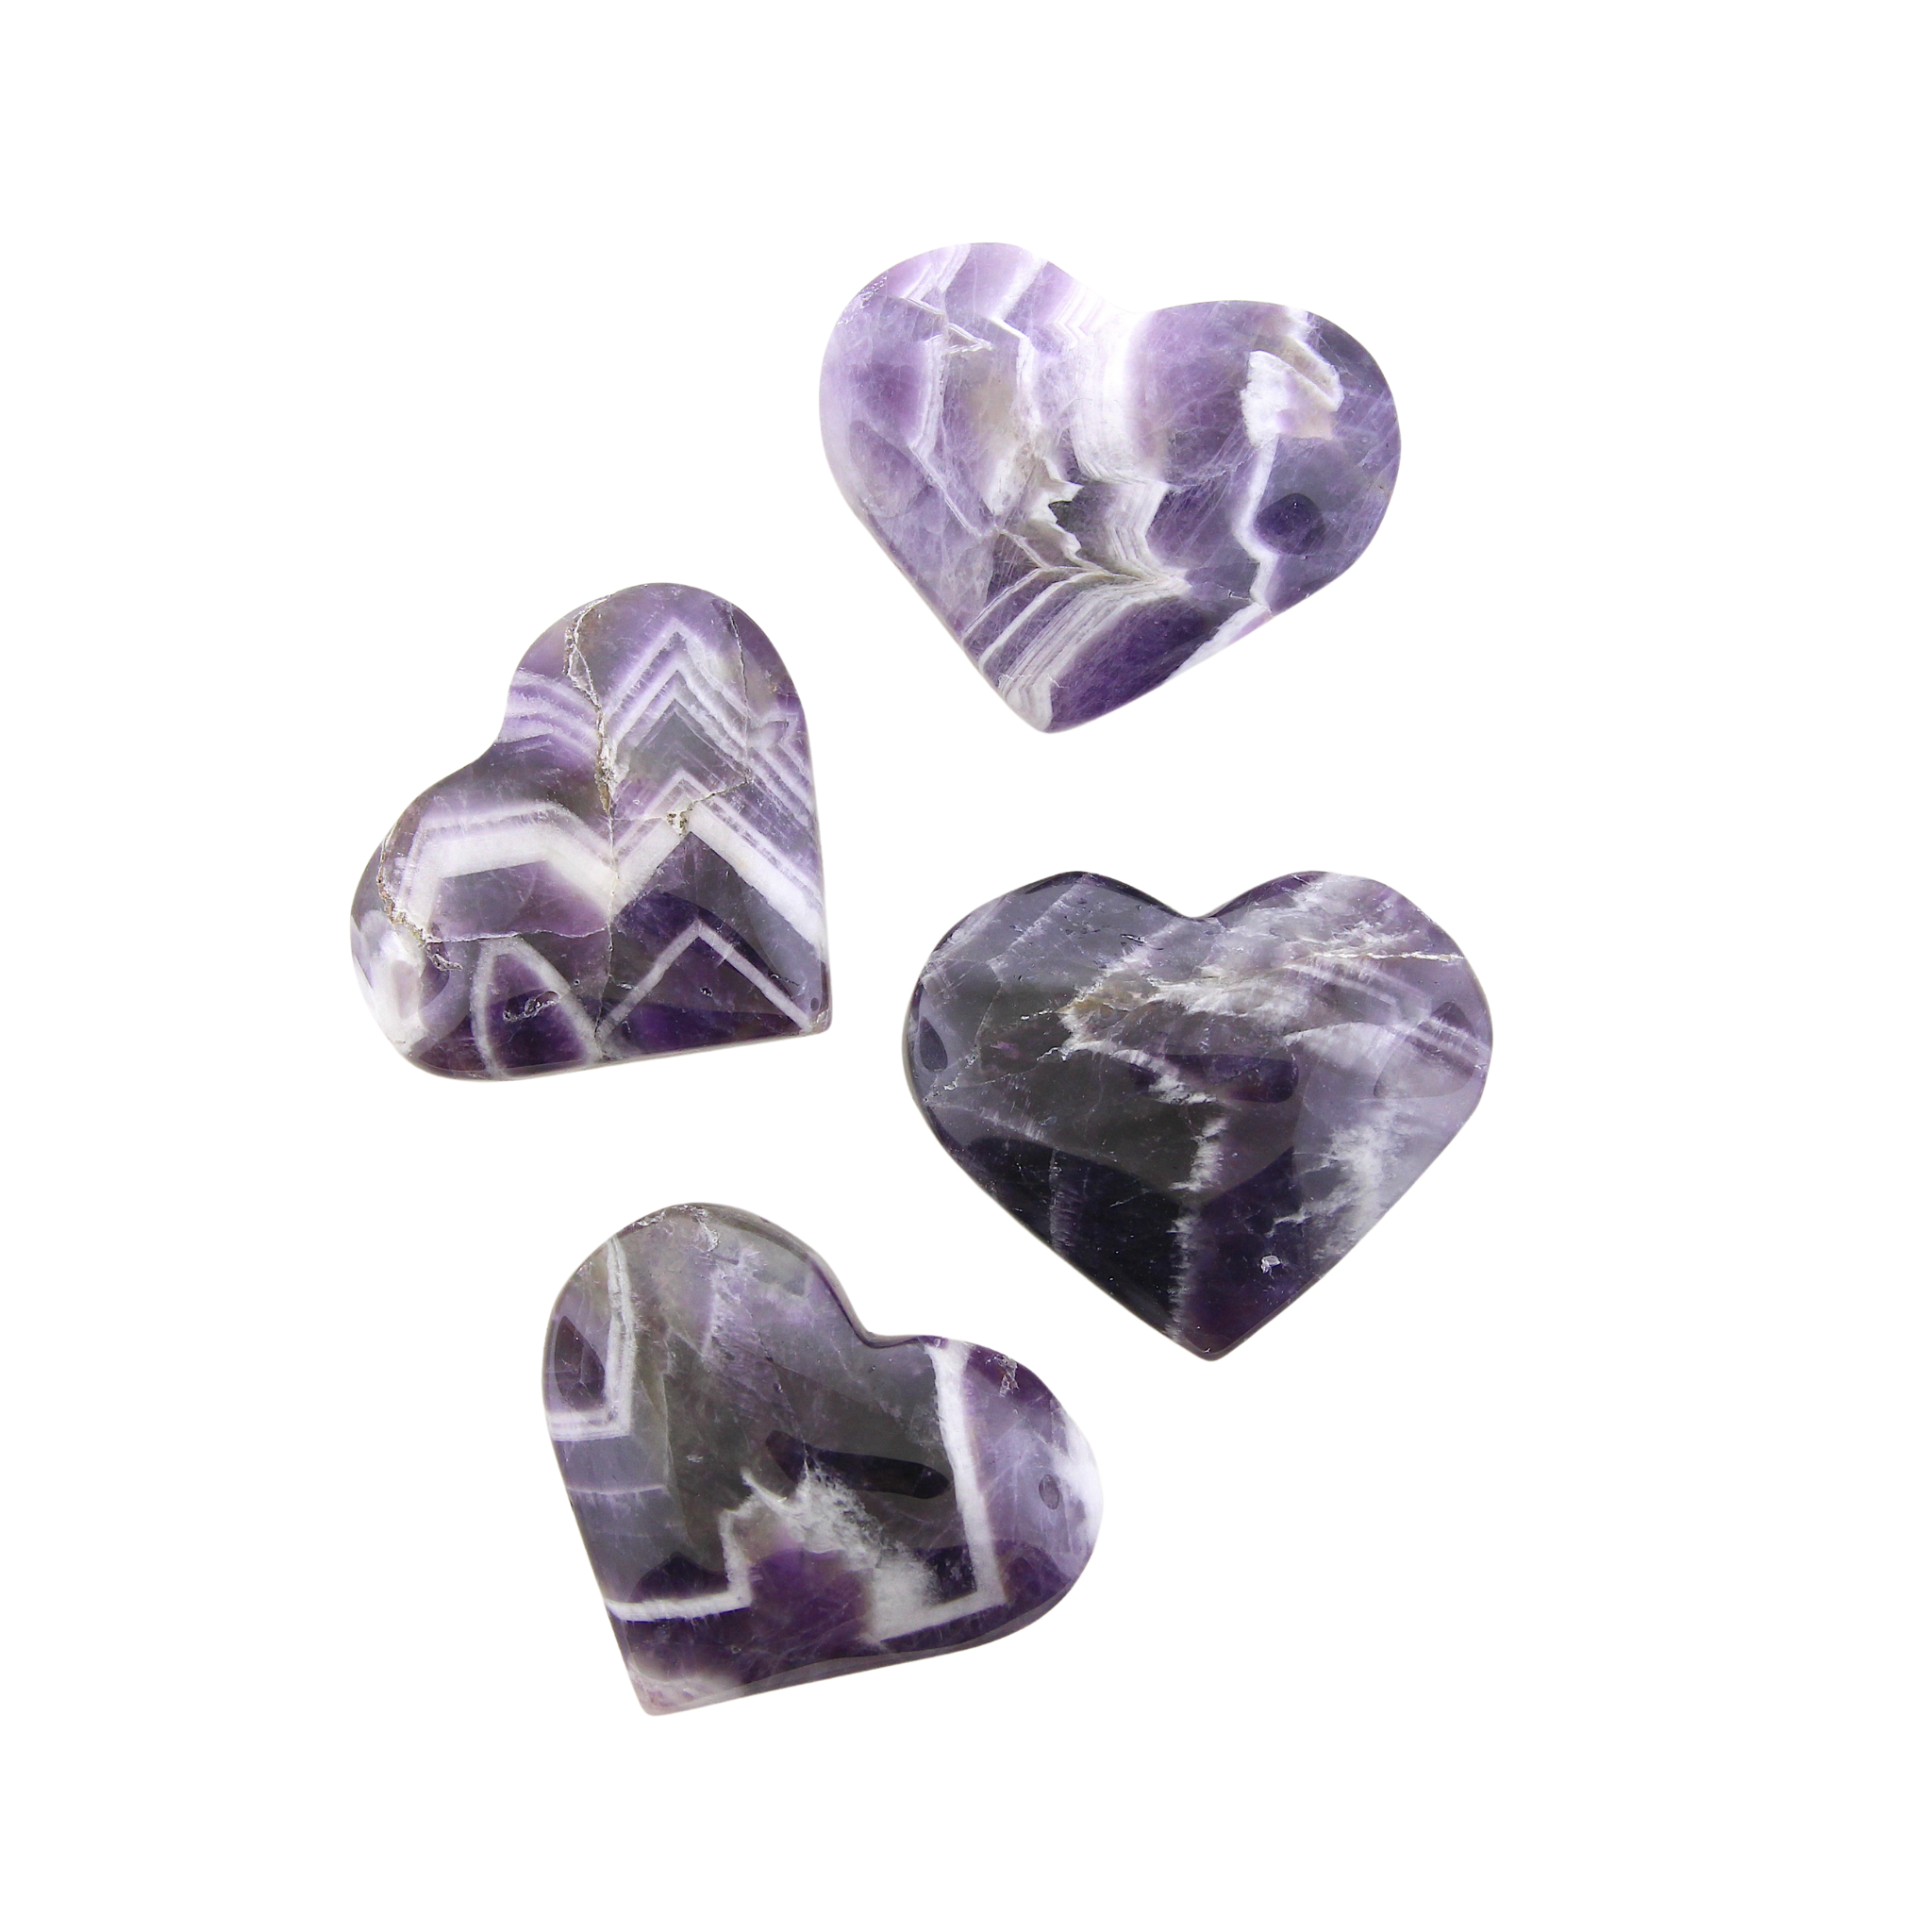 Large Heart Palm Stones - Banded Amethyst